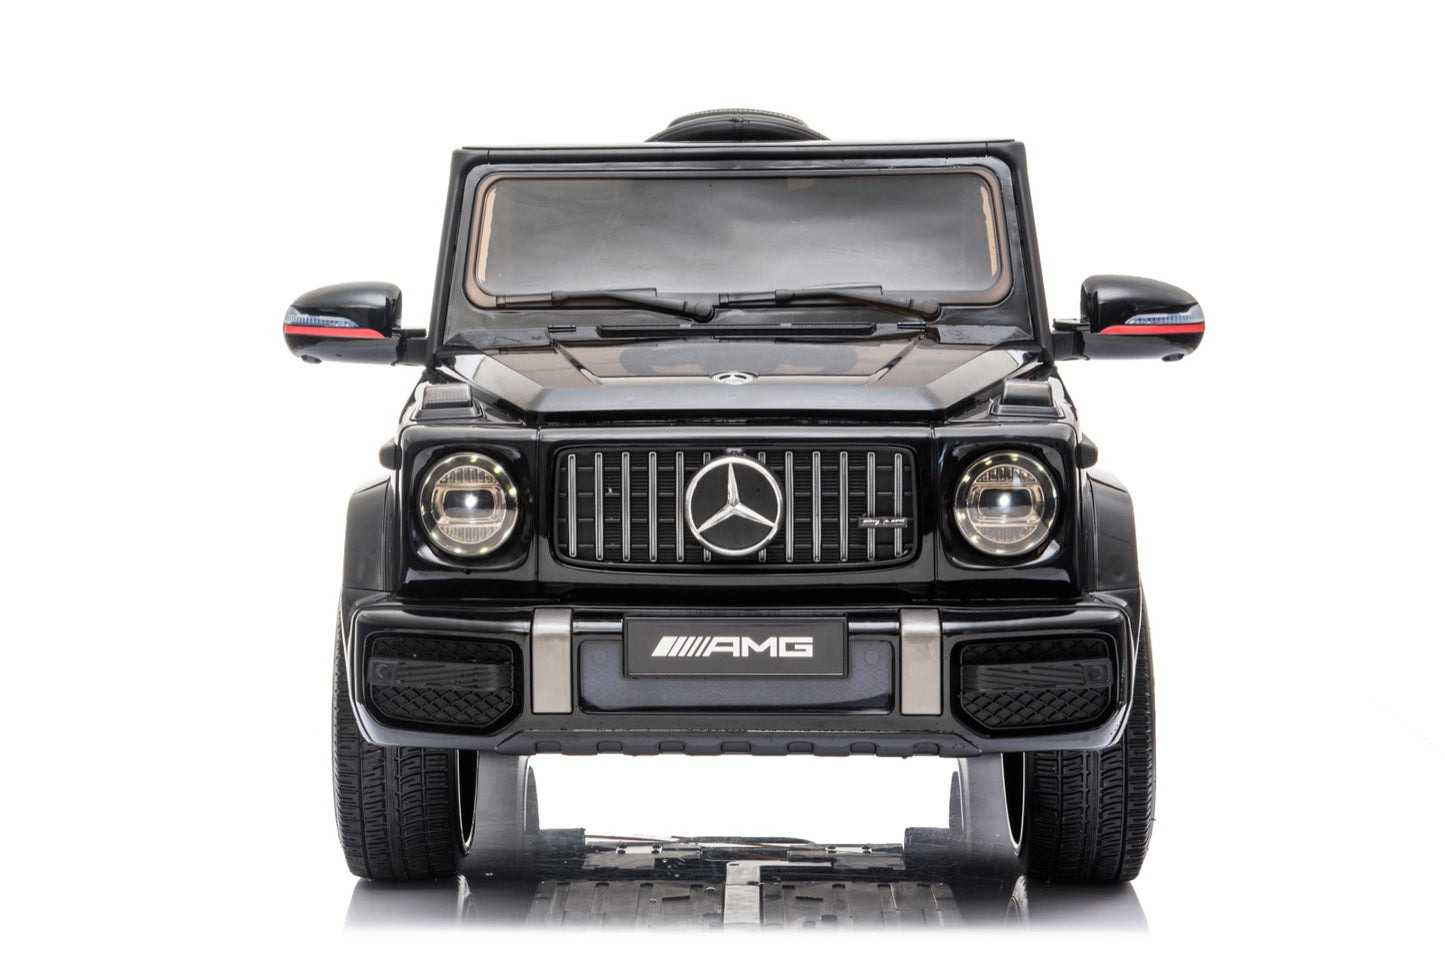 Mercedes G63 AMG 12V 1 Seat Kids Ride On Car with Remote Control